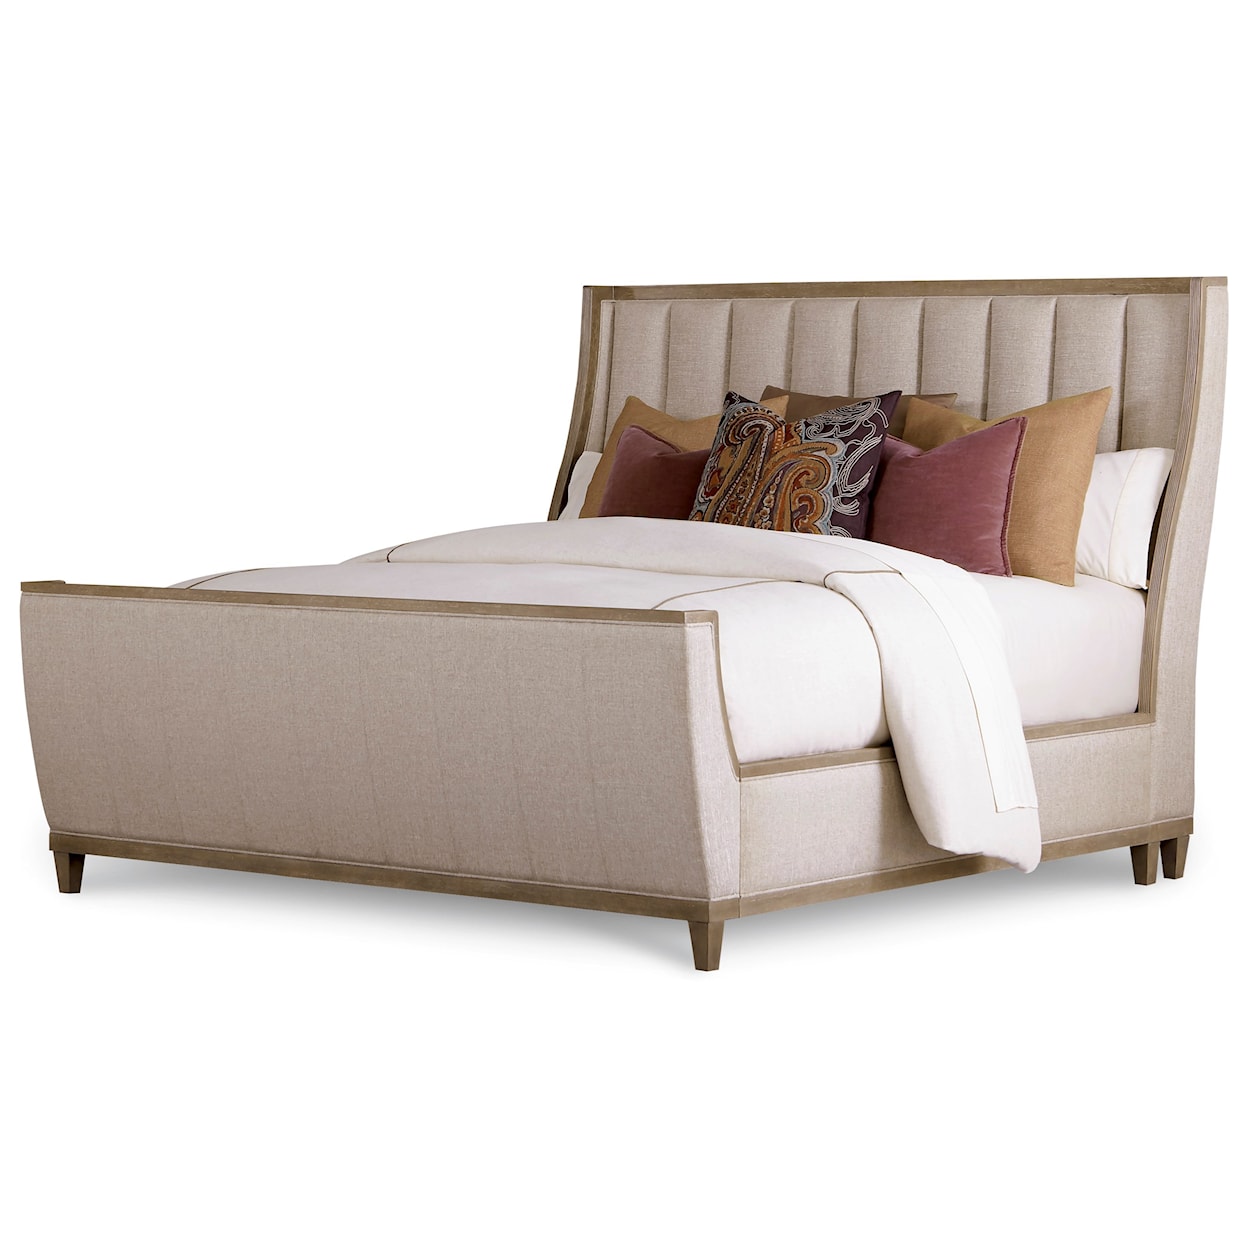 A.R.T. Furniture Inc Cityscapes King Chelsea Upholstered Shelter Sleigh Bed